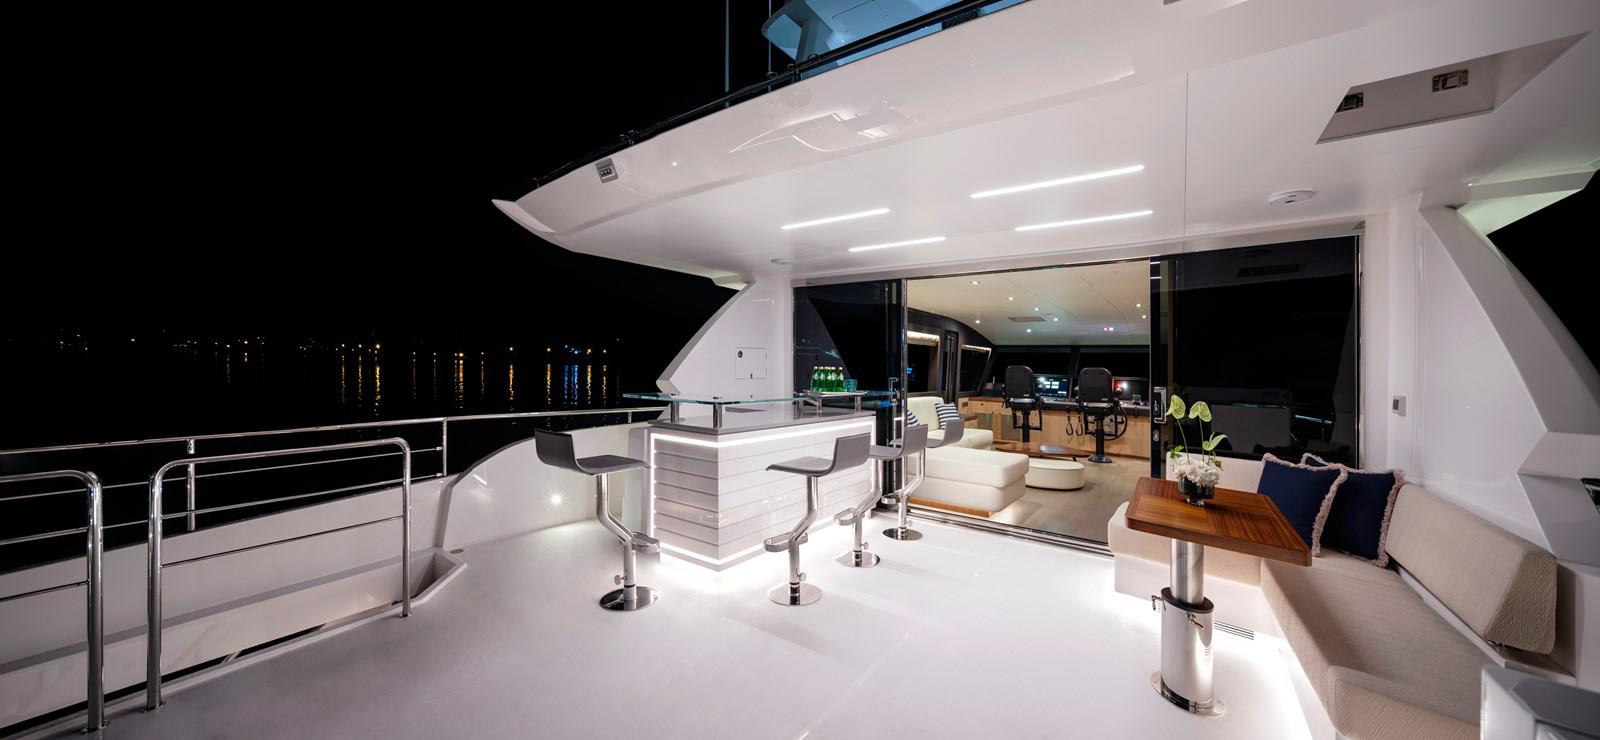 FD87 Aqua Life boat deck with bar, barstools, dinette and view into skylounge.